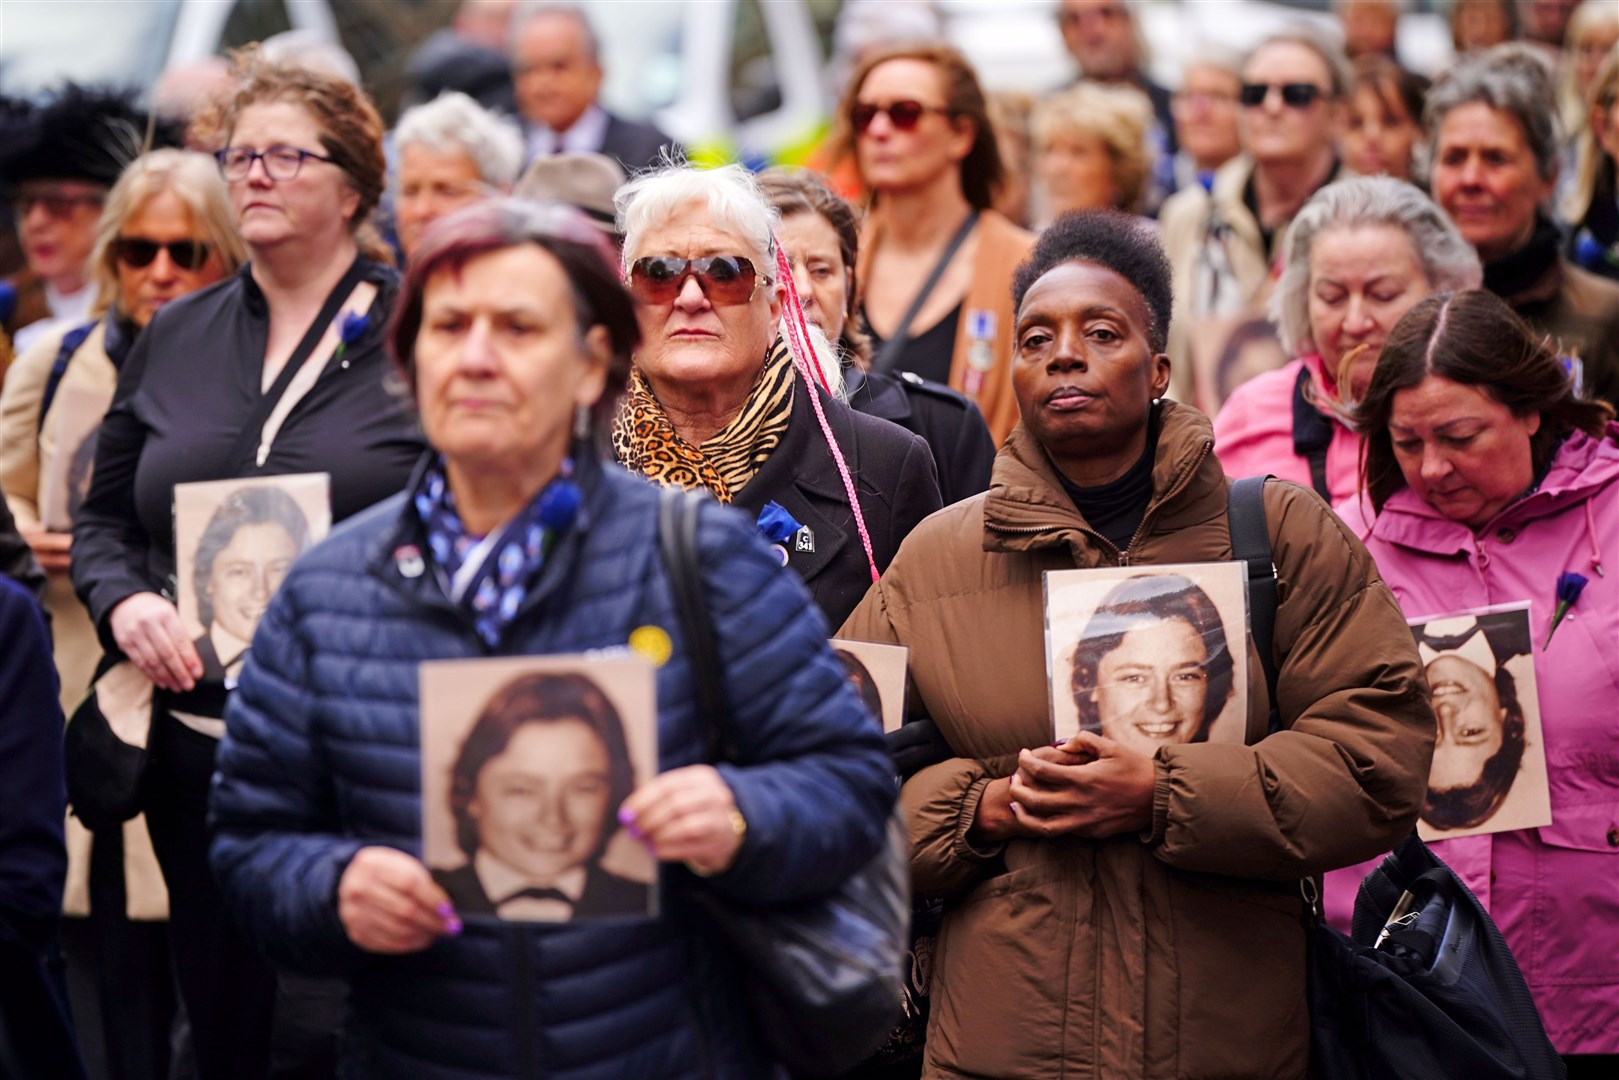 Colleagues of Pc Yvonne Fletcher hold photos of her during a procession around St James’s Square, London, ahead of the memorial service (Victoria Jones/PA)